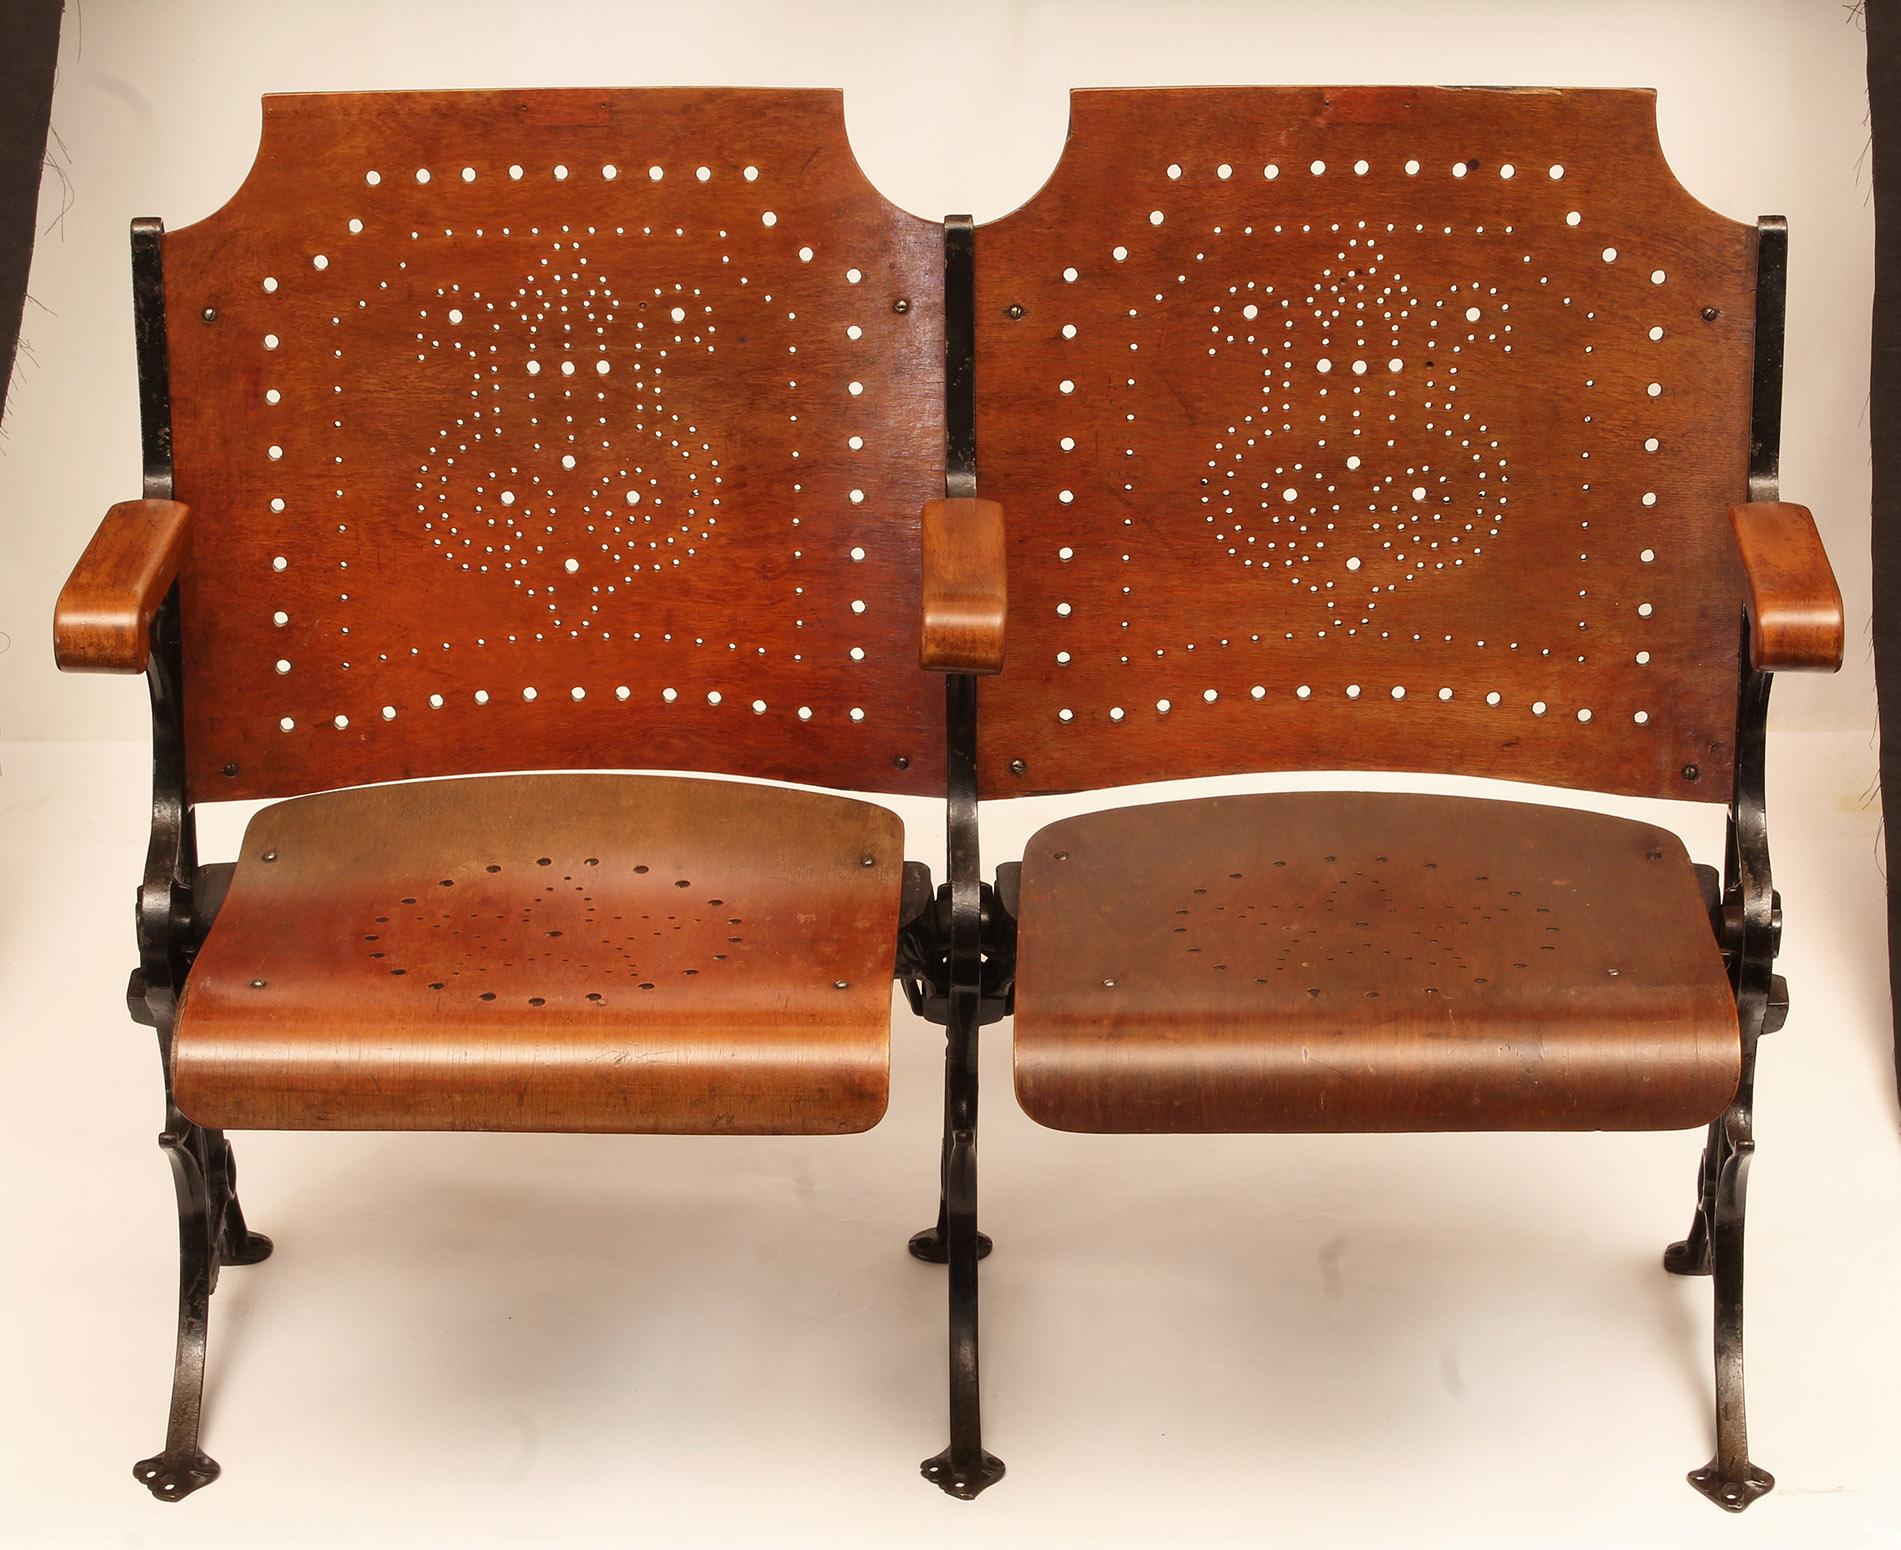 Original vintage steel and wood folding theatre seating, seats/chairs. Available in any configuration from one to ten. This is a set of two.
Item pictured is an example. Because these are vintage, there are minor variances. Images of available